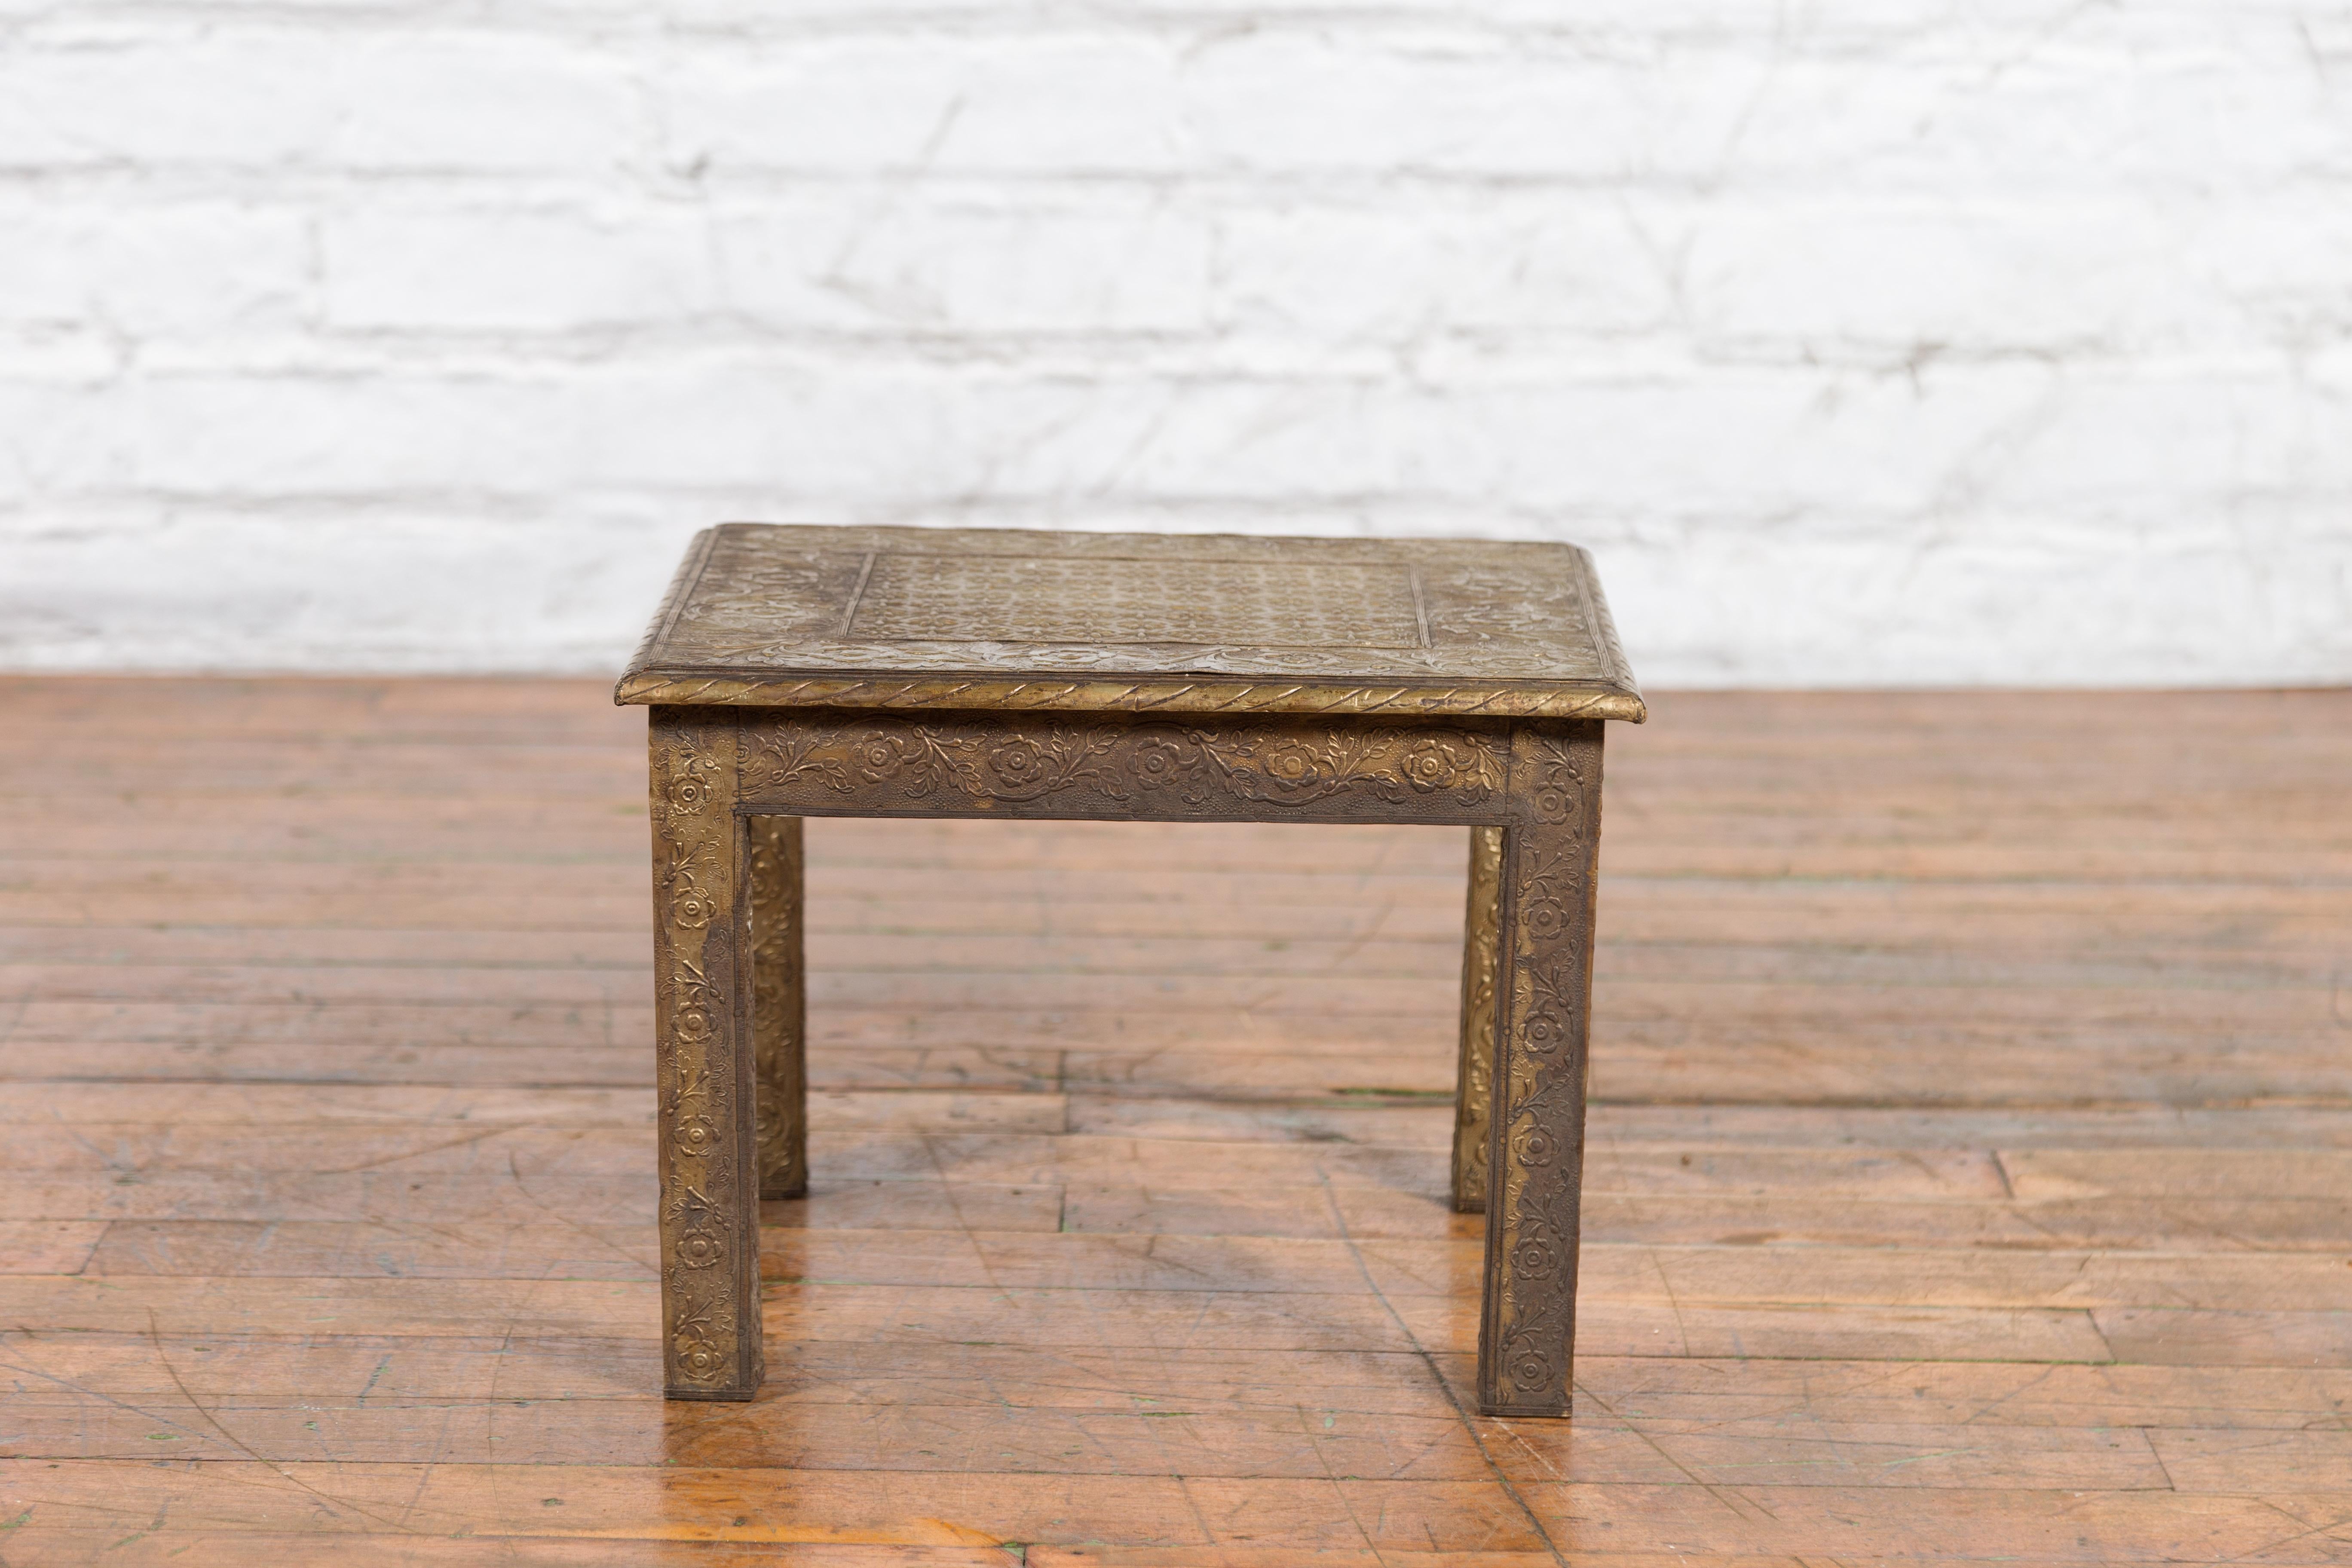 20th Century Indian Vintage Square Shaped Side Table with Repoussé Floral Motifs